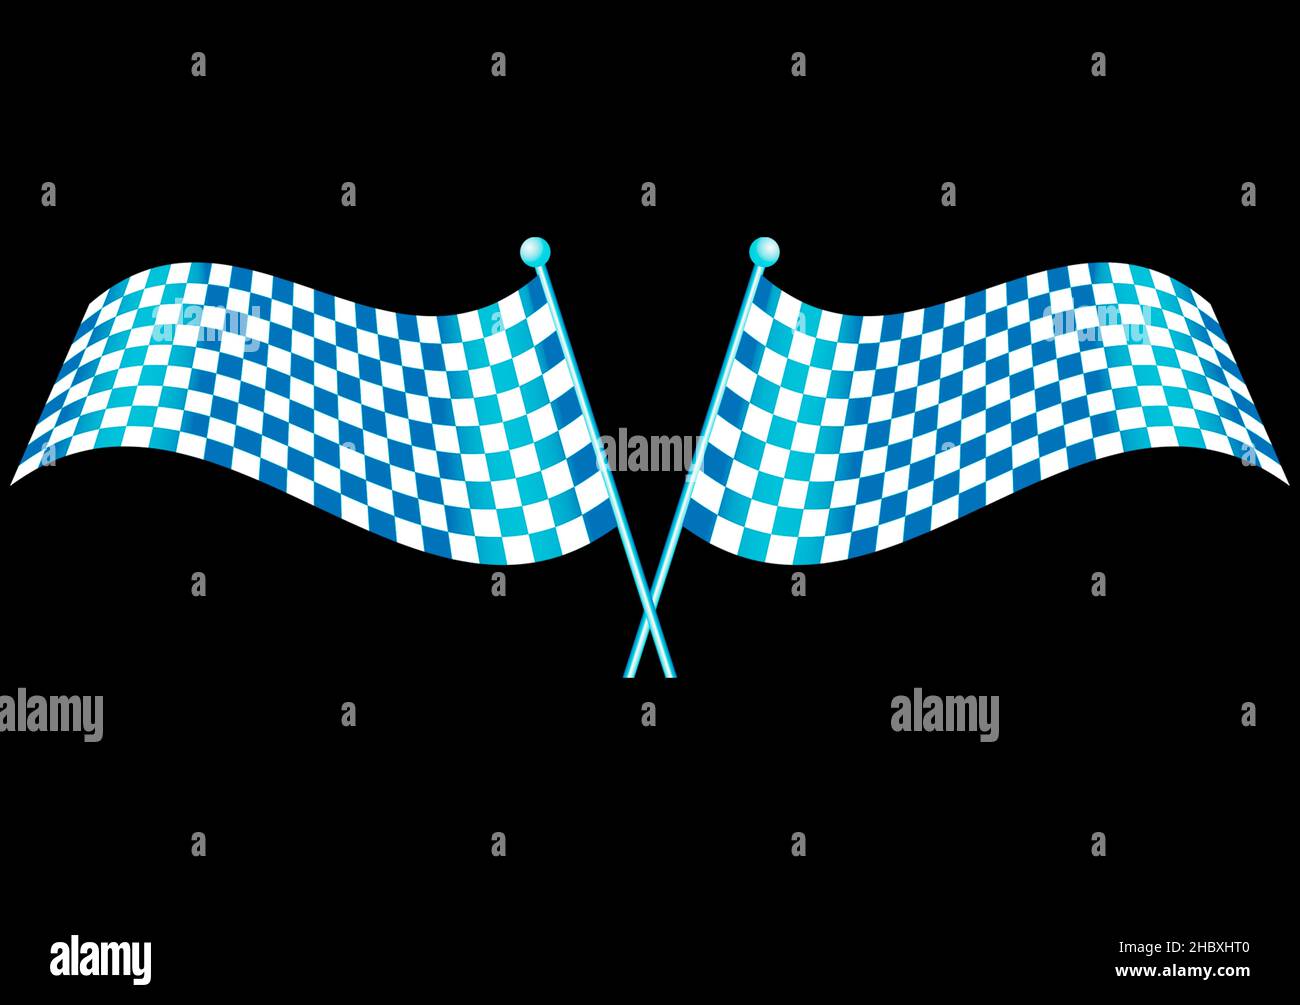 checkered racing flag cool - white teal blue flag Stock Photo